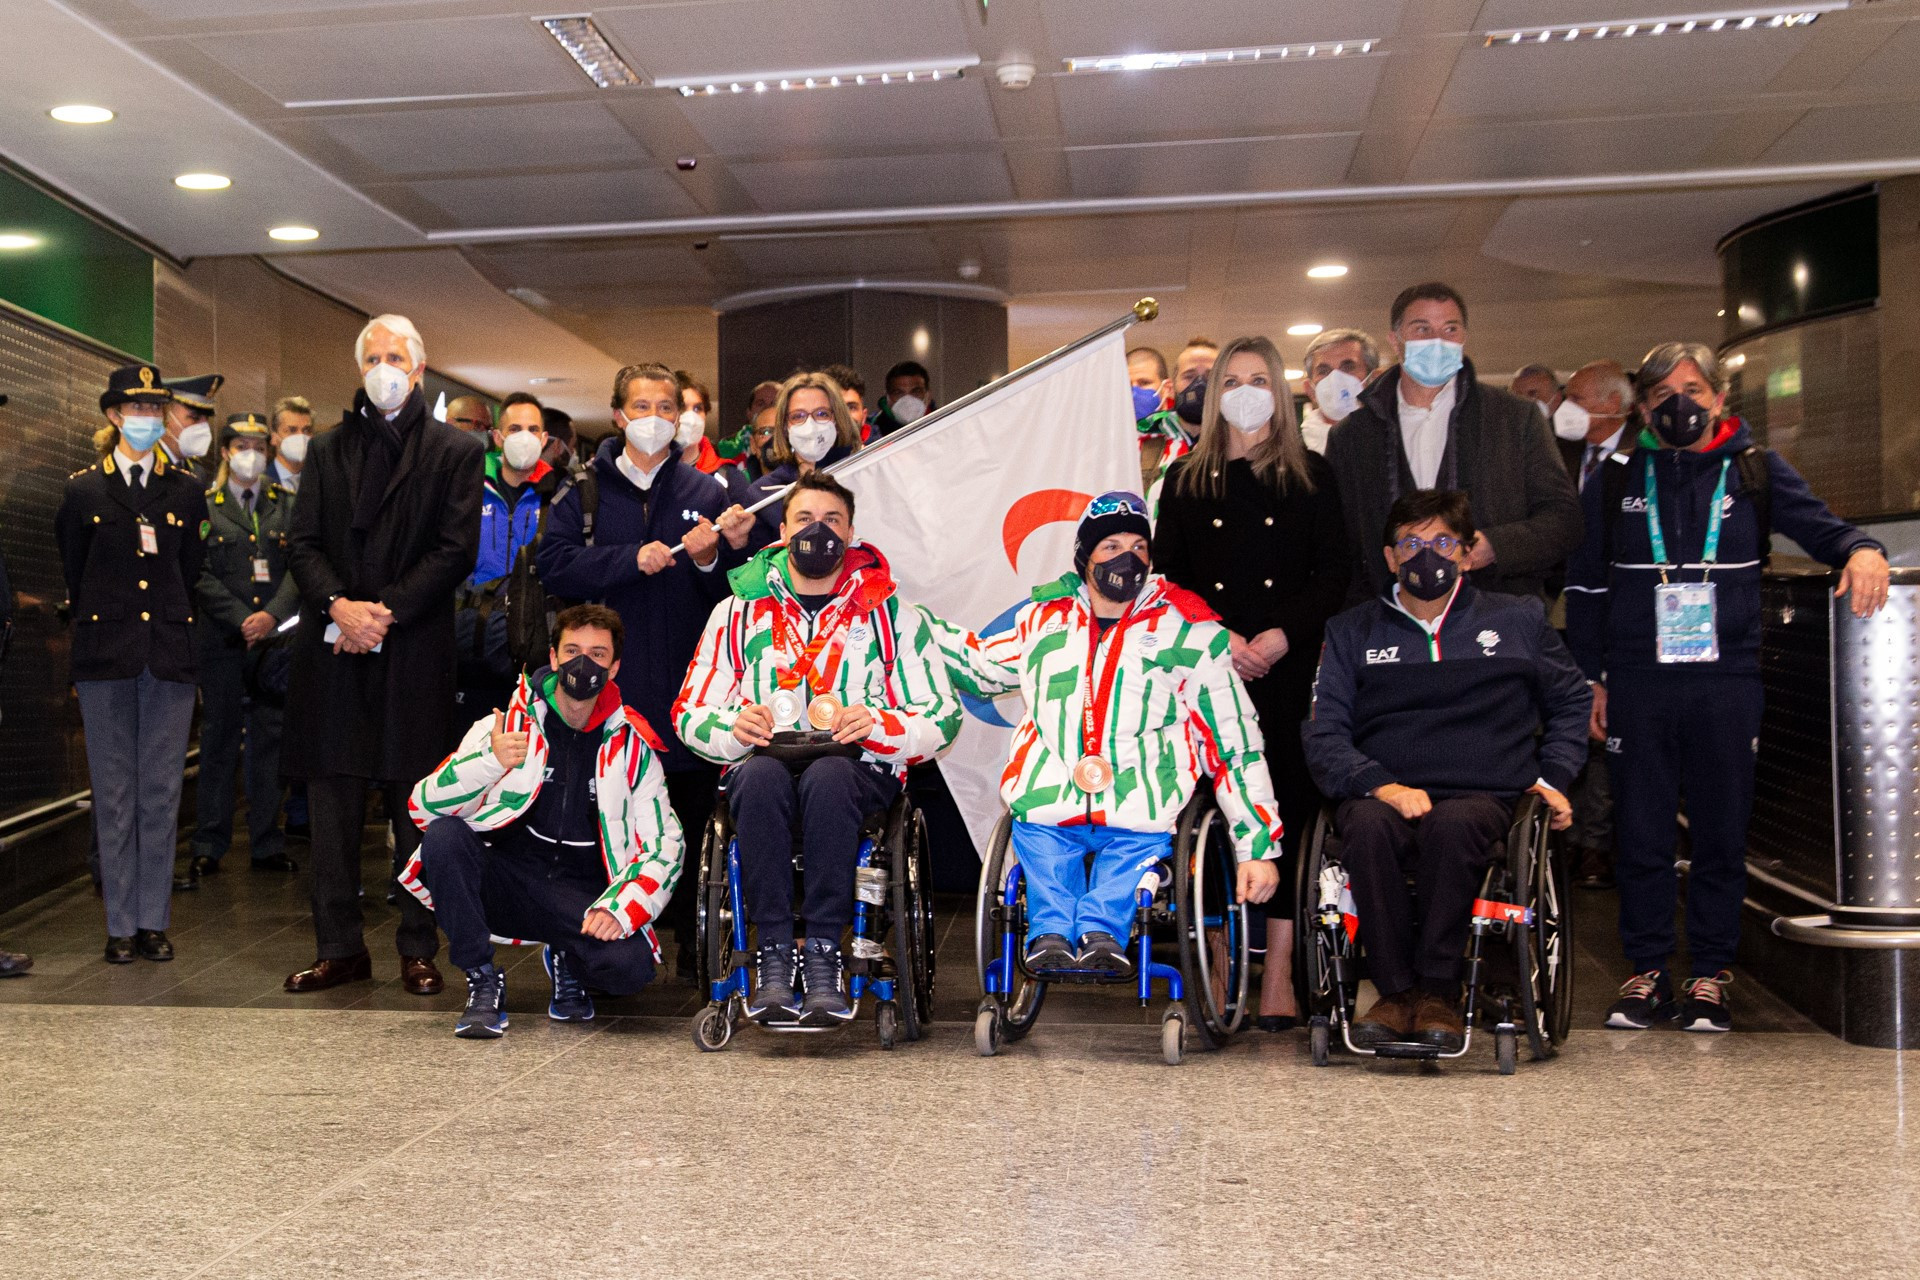 The Paralympic Flag arrived at Milan's Malpensa airport with the Italian team from Beijing 2022 ©Milan Cortina 2026